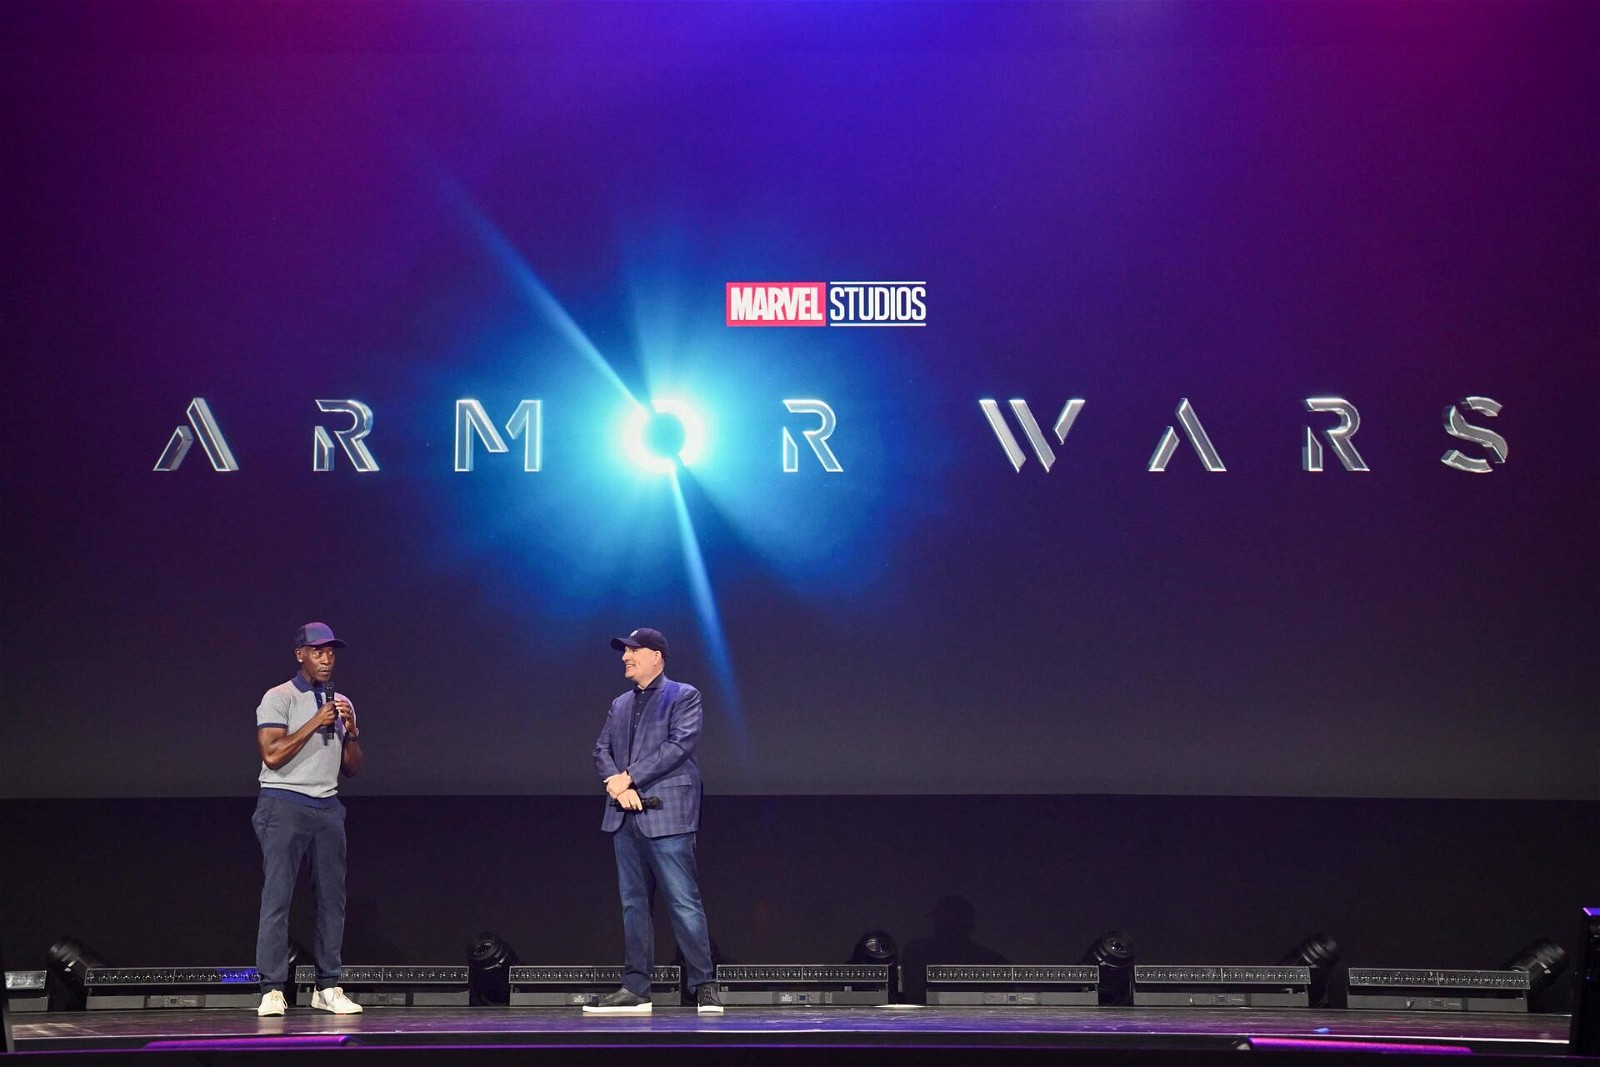 Armor Wars announced by Kevin Feige and Don Cheadle